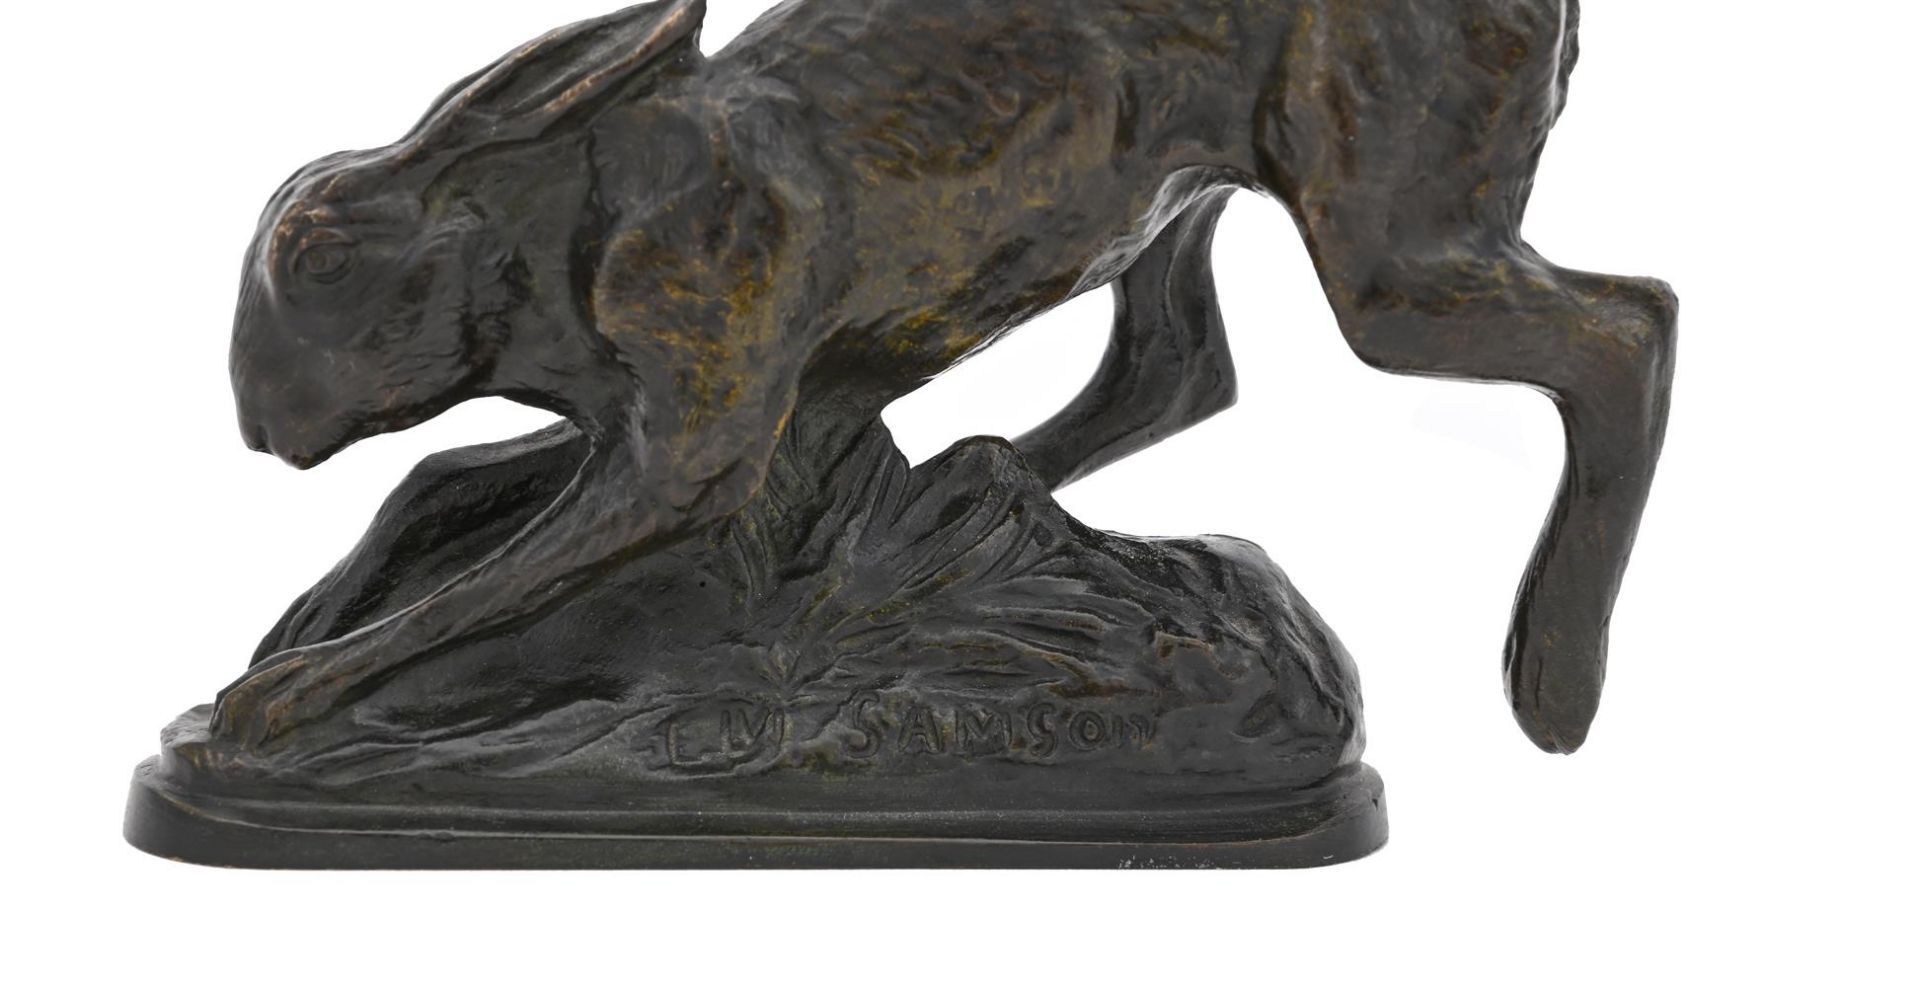 E M SAMSON (FRENCH, LATE 19TH/EARLY 20TH CENTURY), A BRONZE MODEL OF A RUNNING HARE - Image 2 of 5